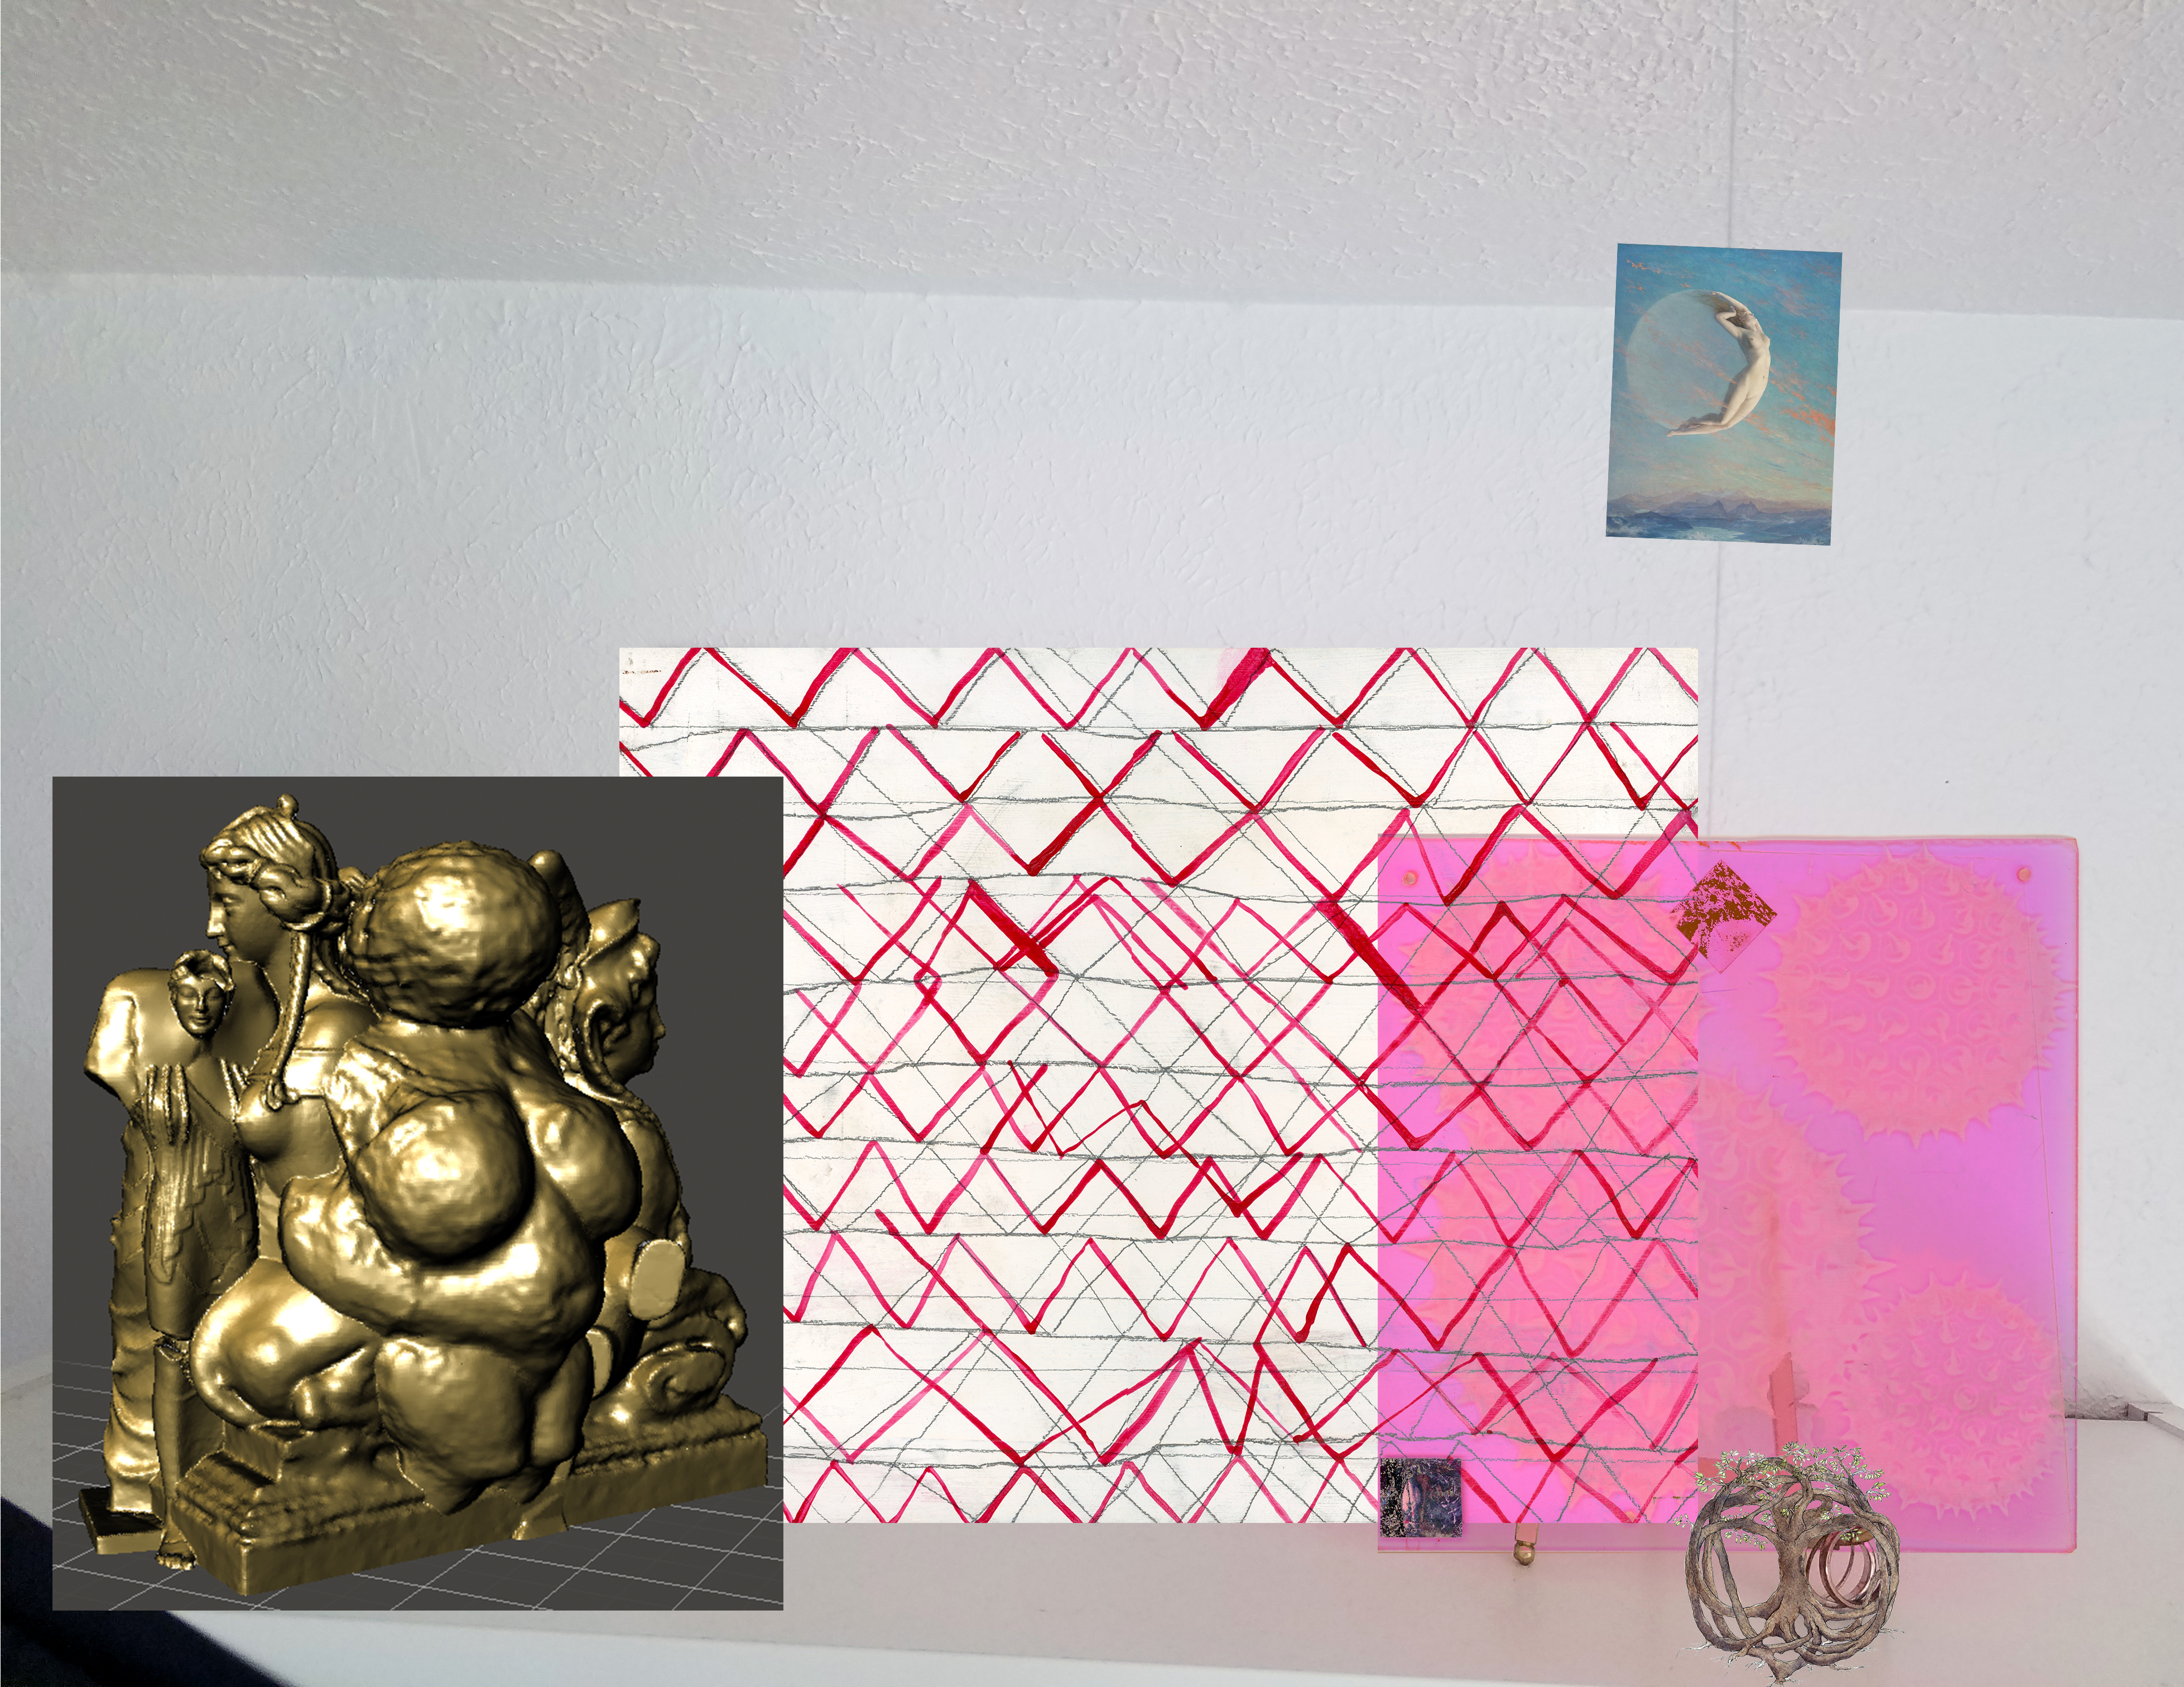 sphinxheart (gold)
			jennifer's drawing of noah's dream drawing (red mountains) 
			pollen laser-etch on neon pink acrylic
			(over the bookshelf)